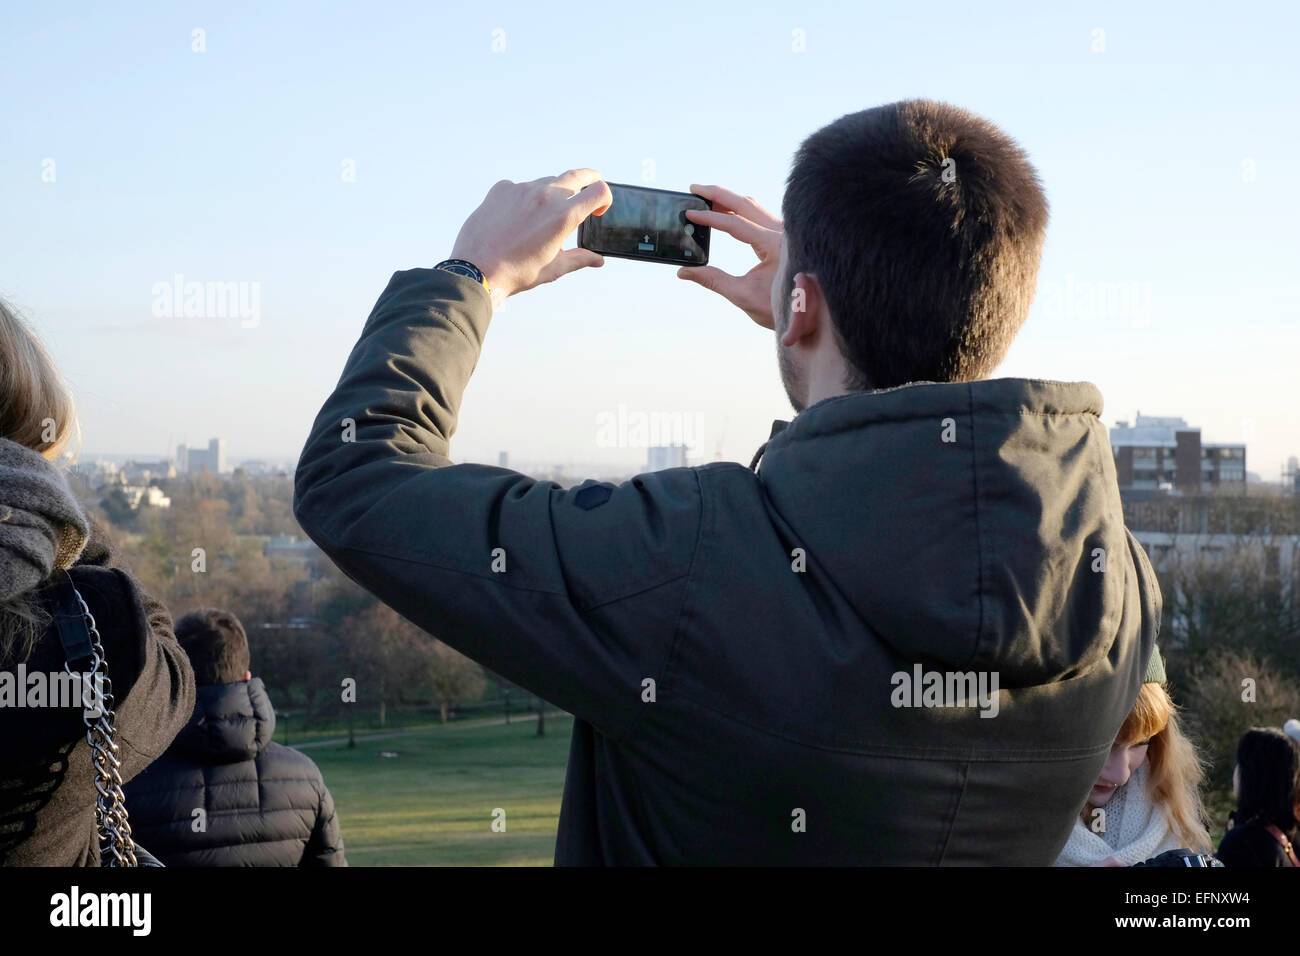 A man taking photos with a smart phone in Primrose Hill, London Stock Photo